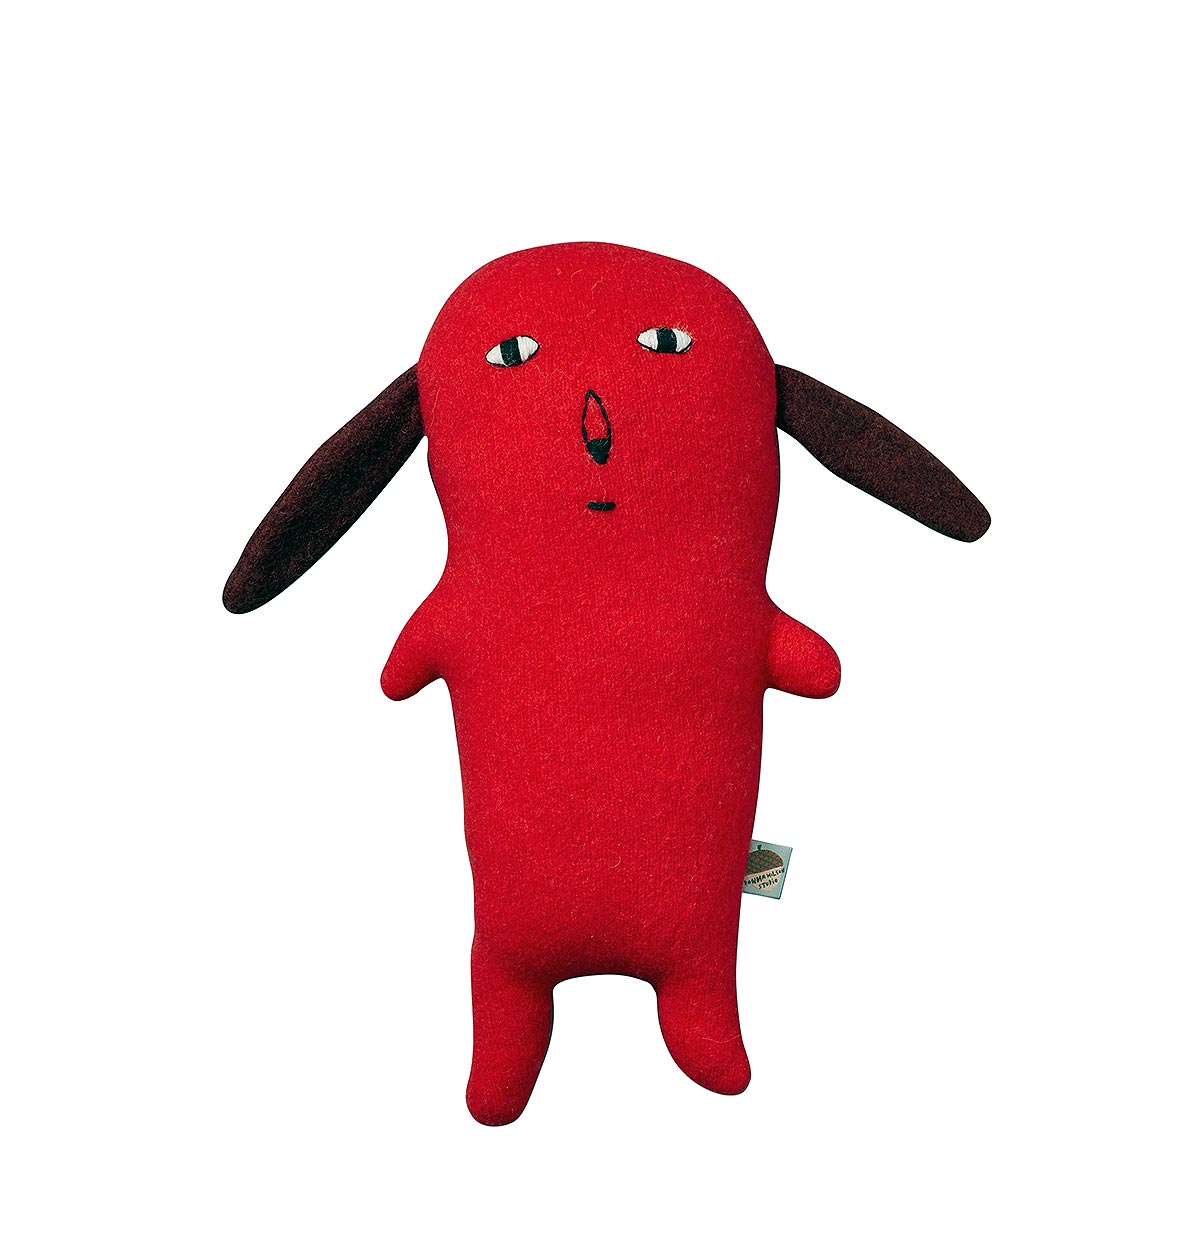 red creature with floppy down black ears